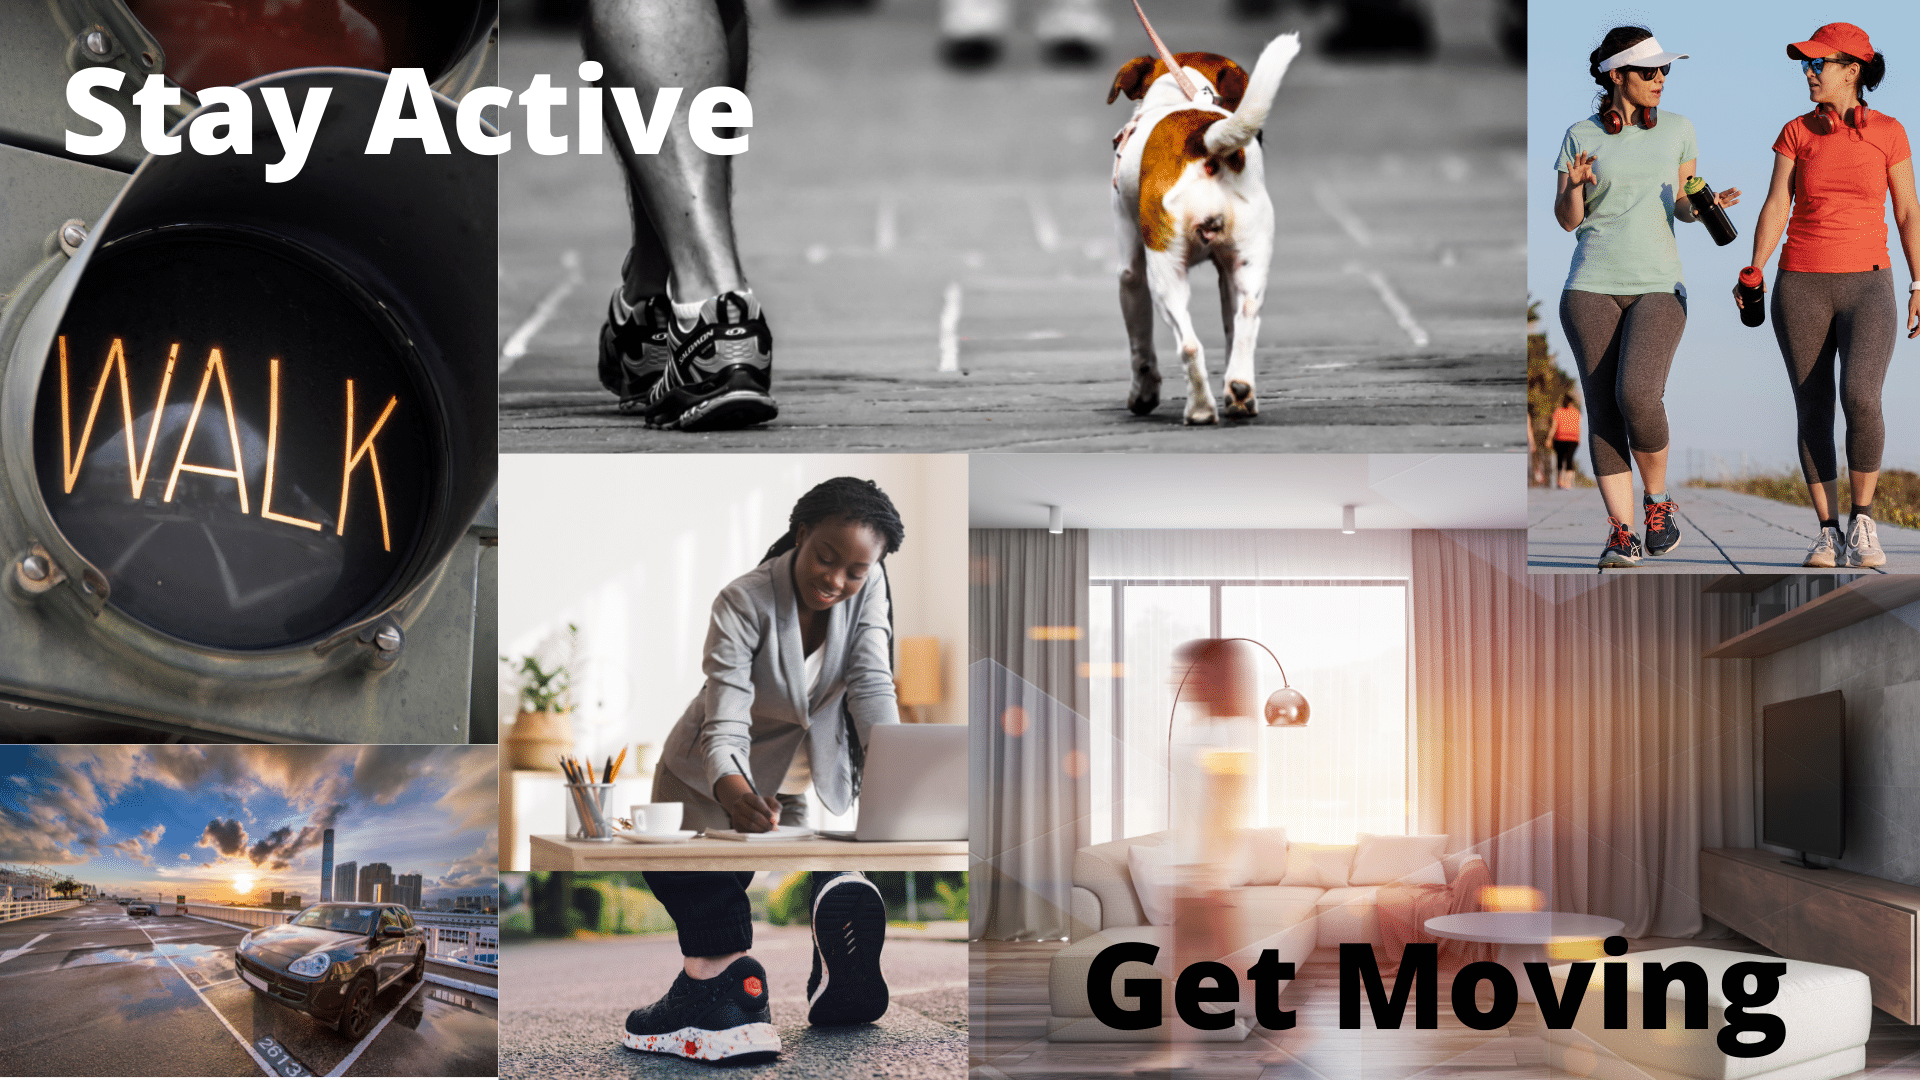 Get Moving; Stay Active